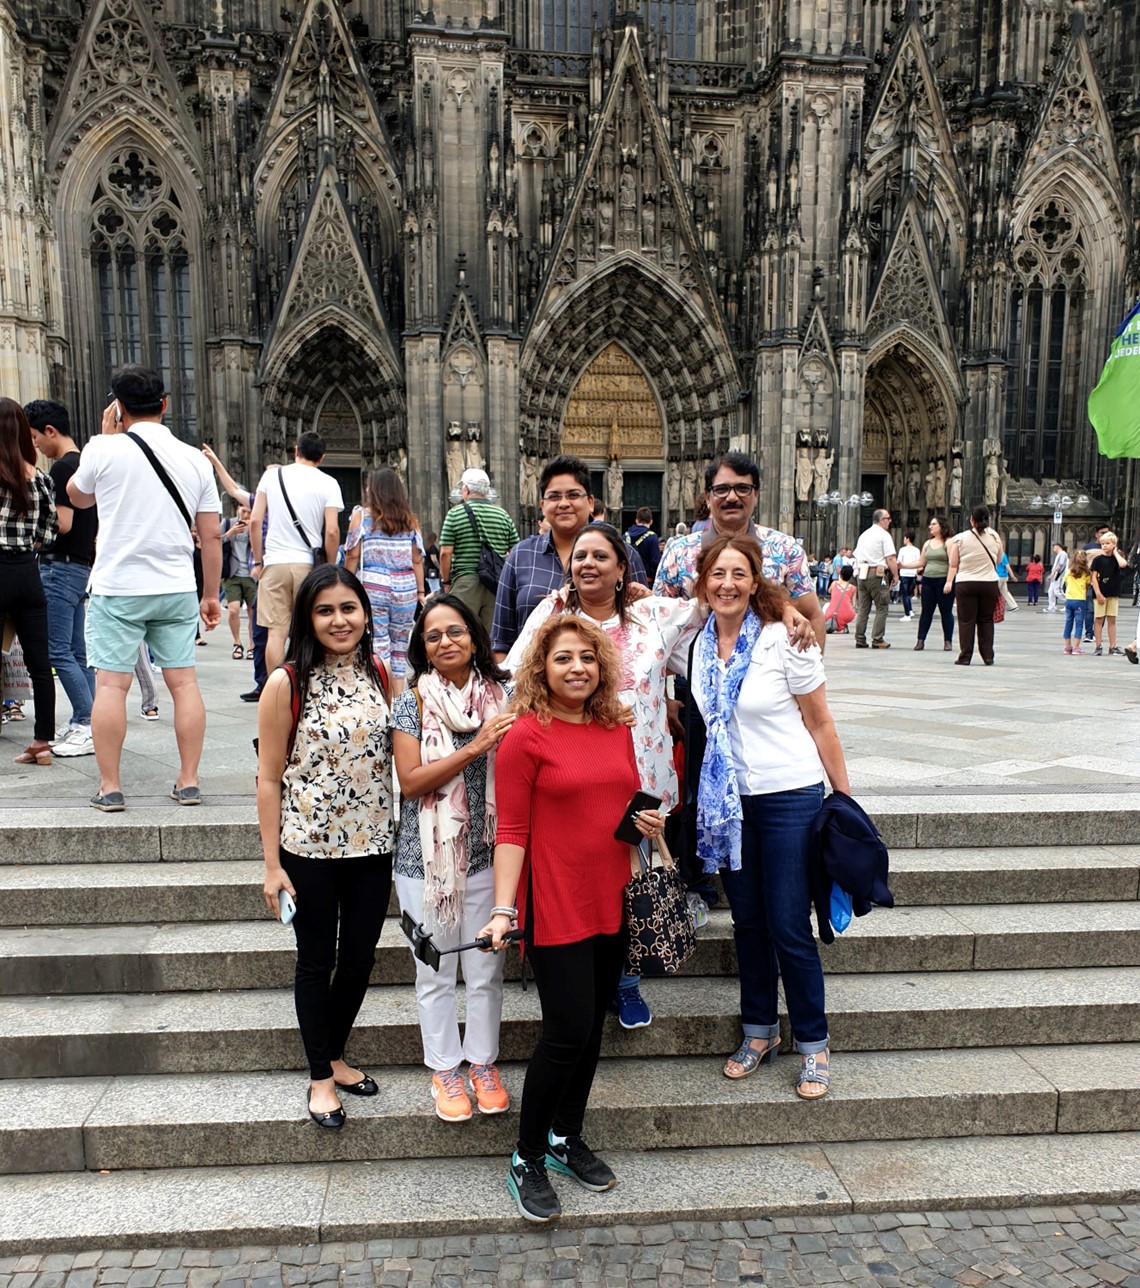 In front of the Cologne Cathedral